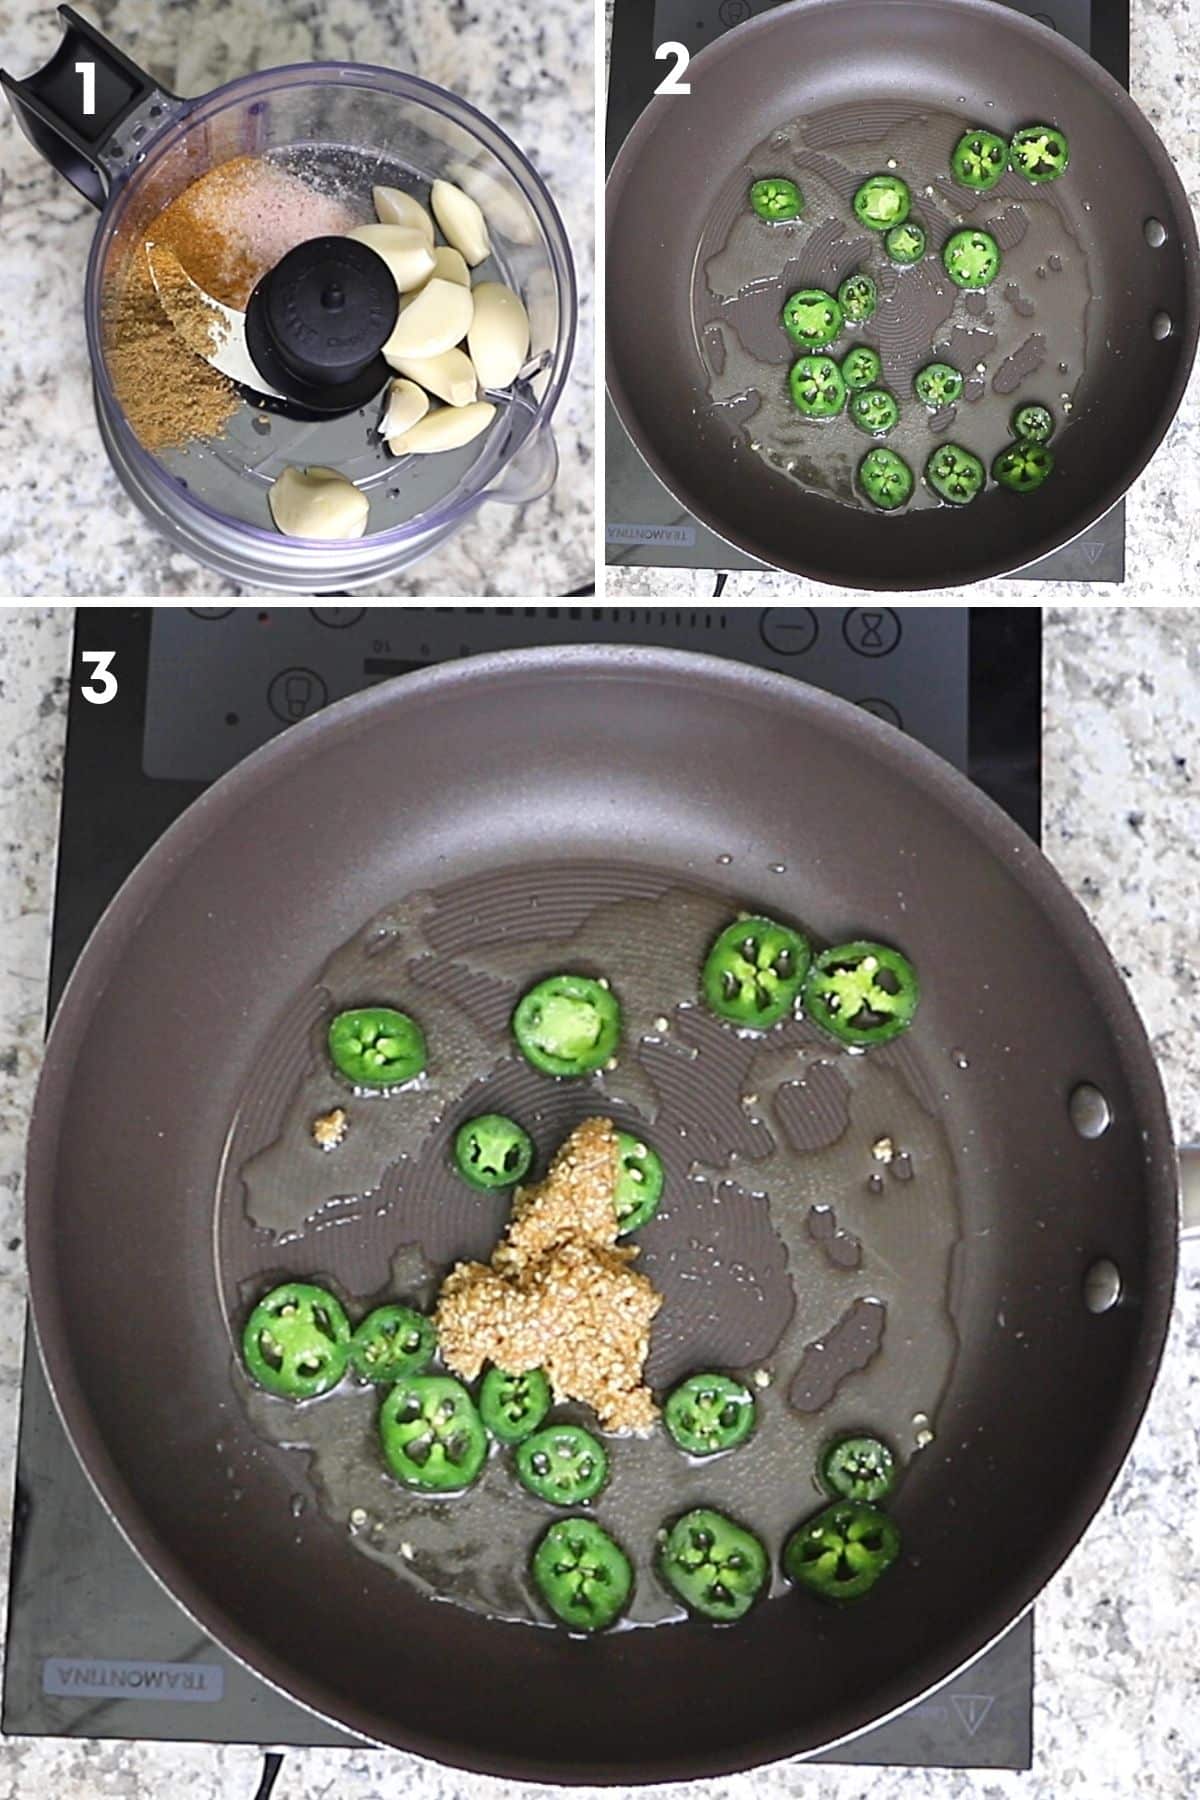 A collage of 3 images showing how to prepare and cook spice mix for liver sandwiches.